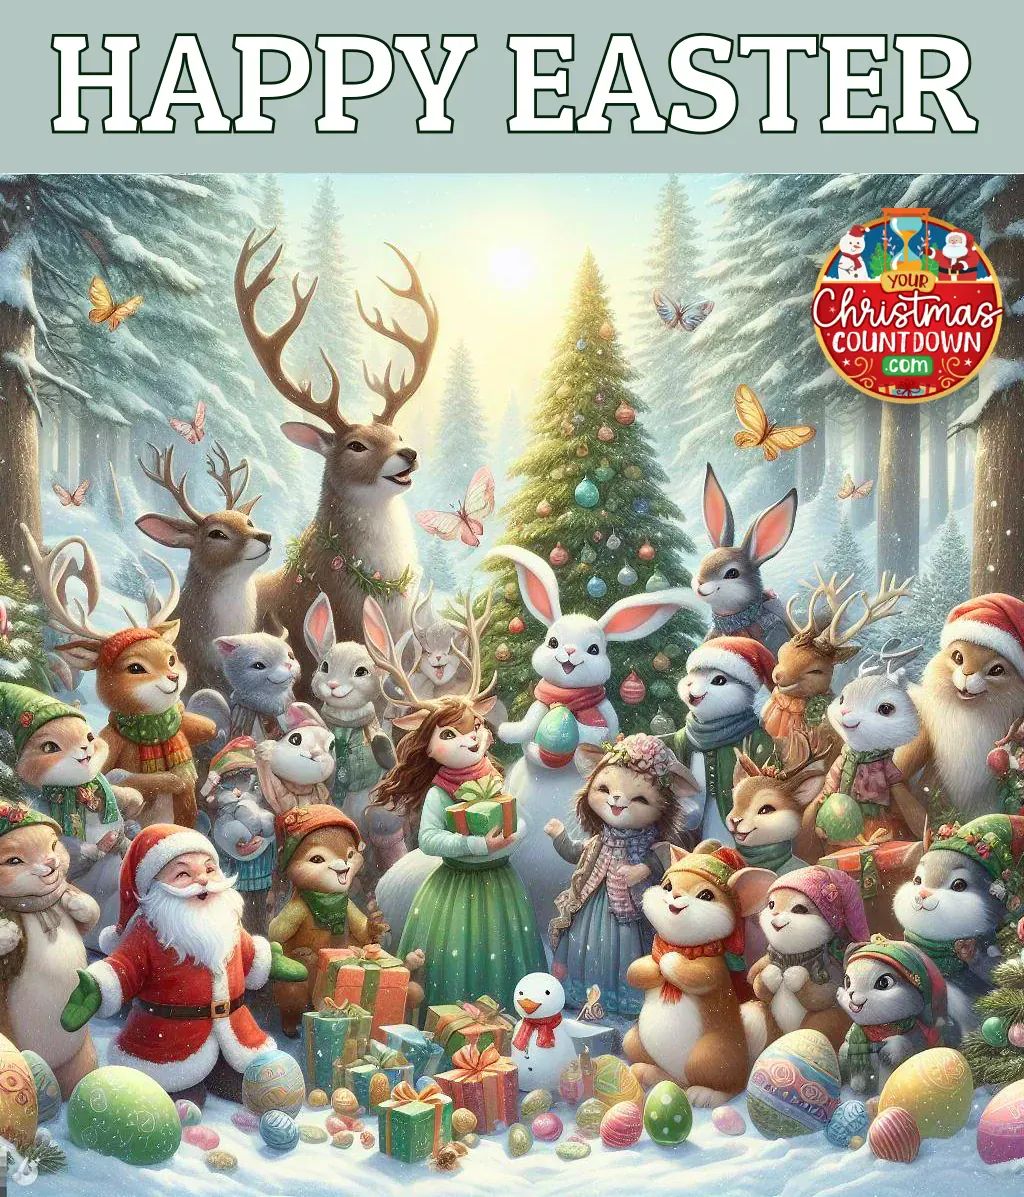 Happy Easter to all! ♥️🐰 🕒 YourChristmasCountdown.com 🎄🎅